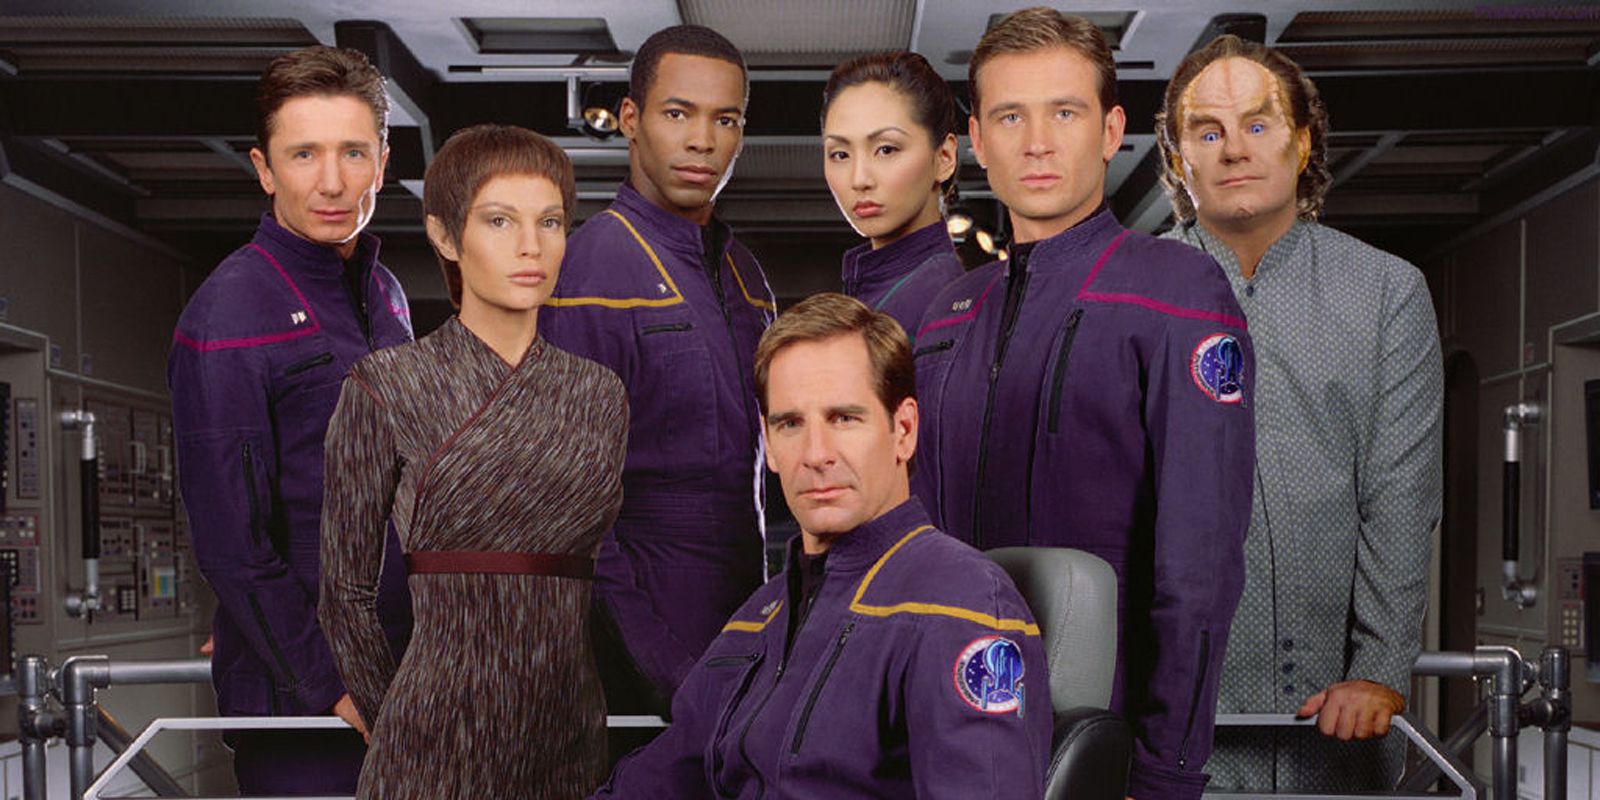 The crew of the NX-01 Enterprise